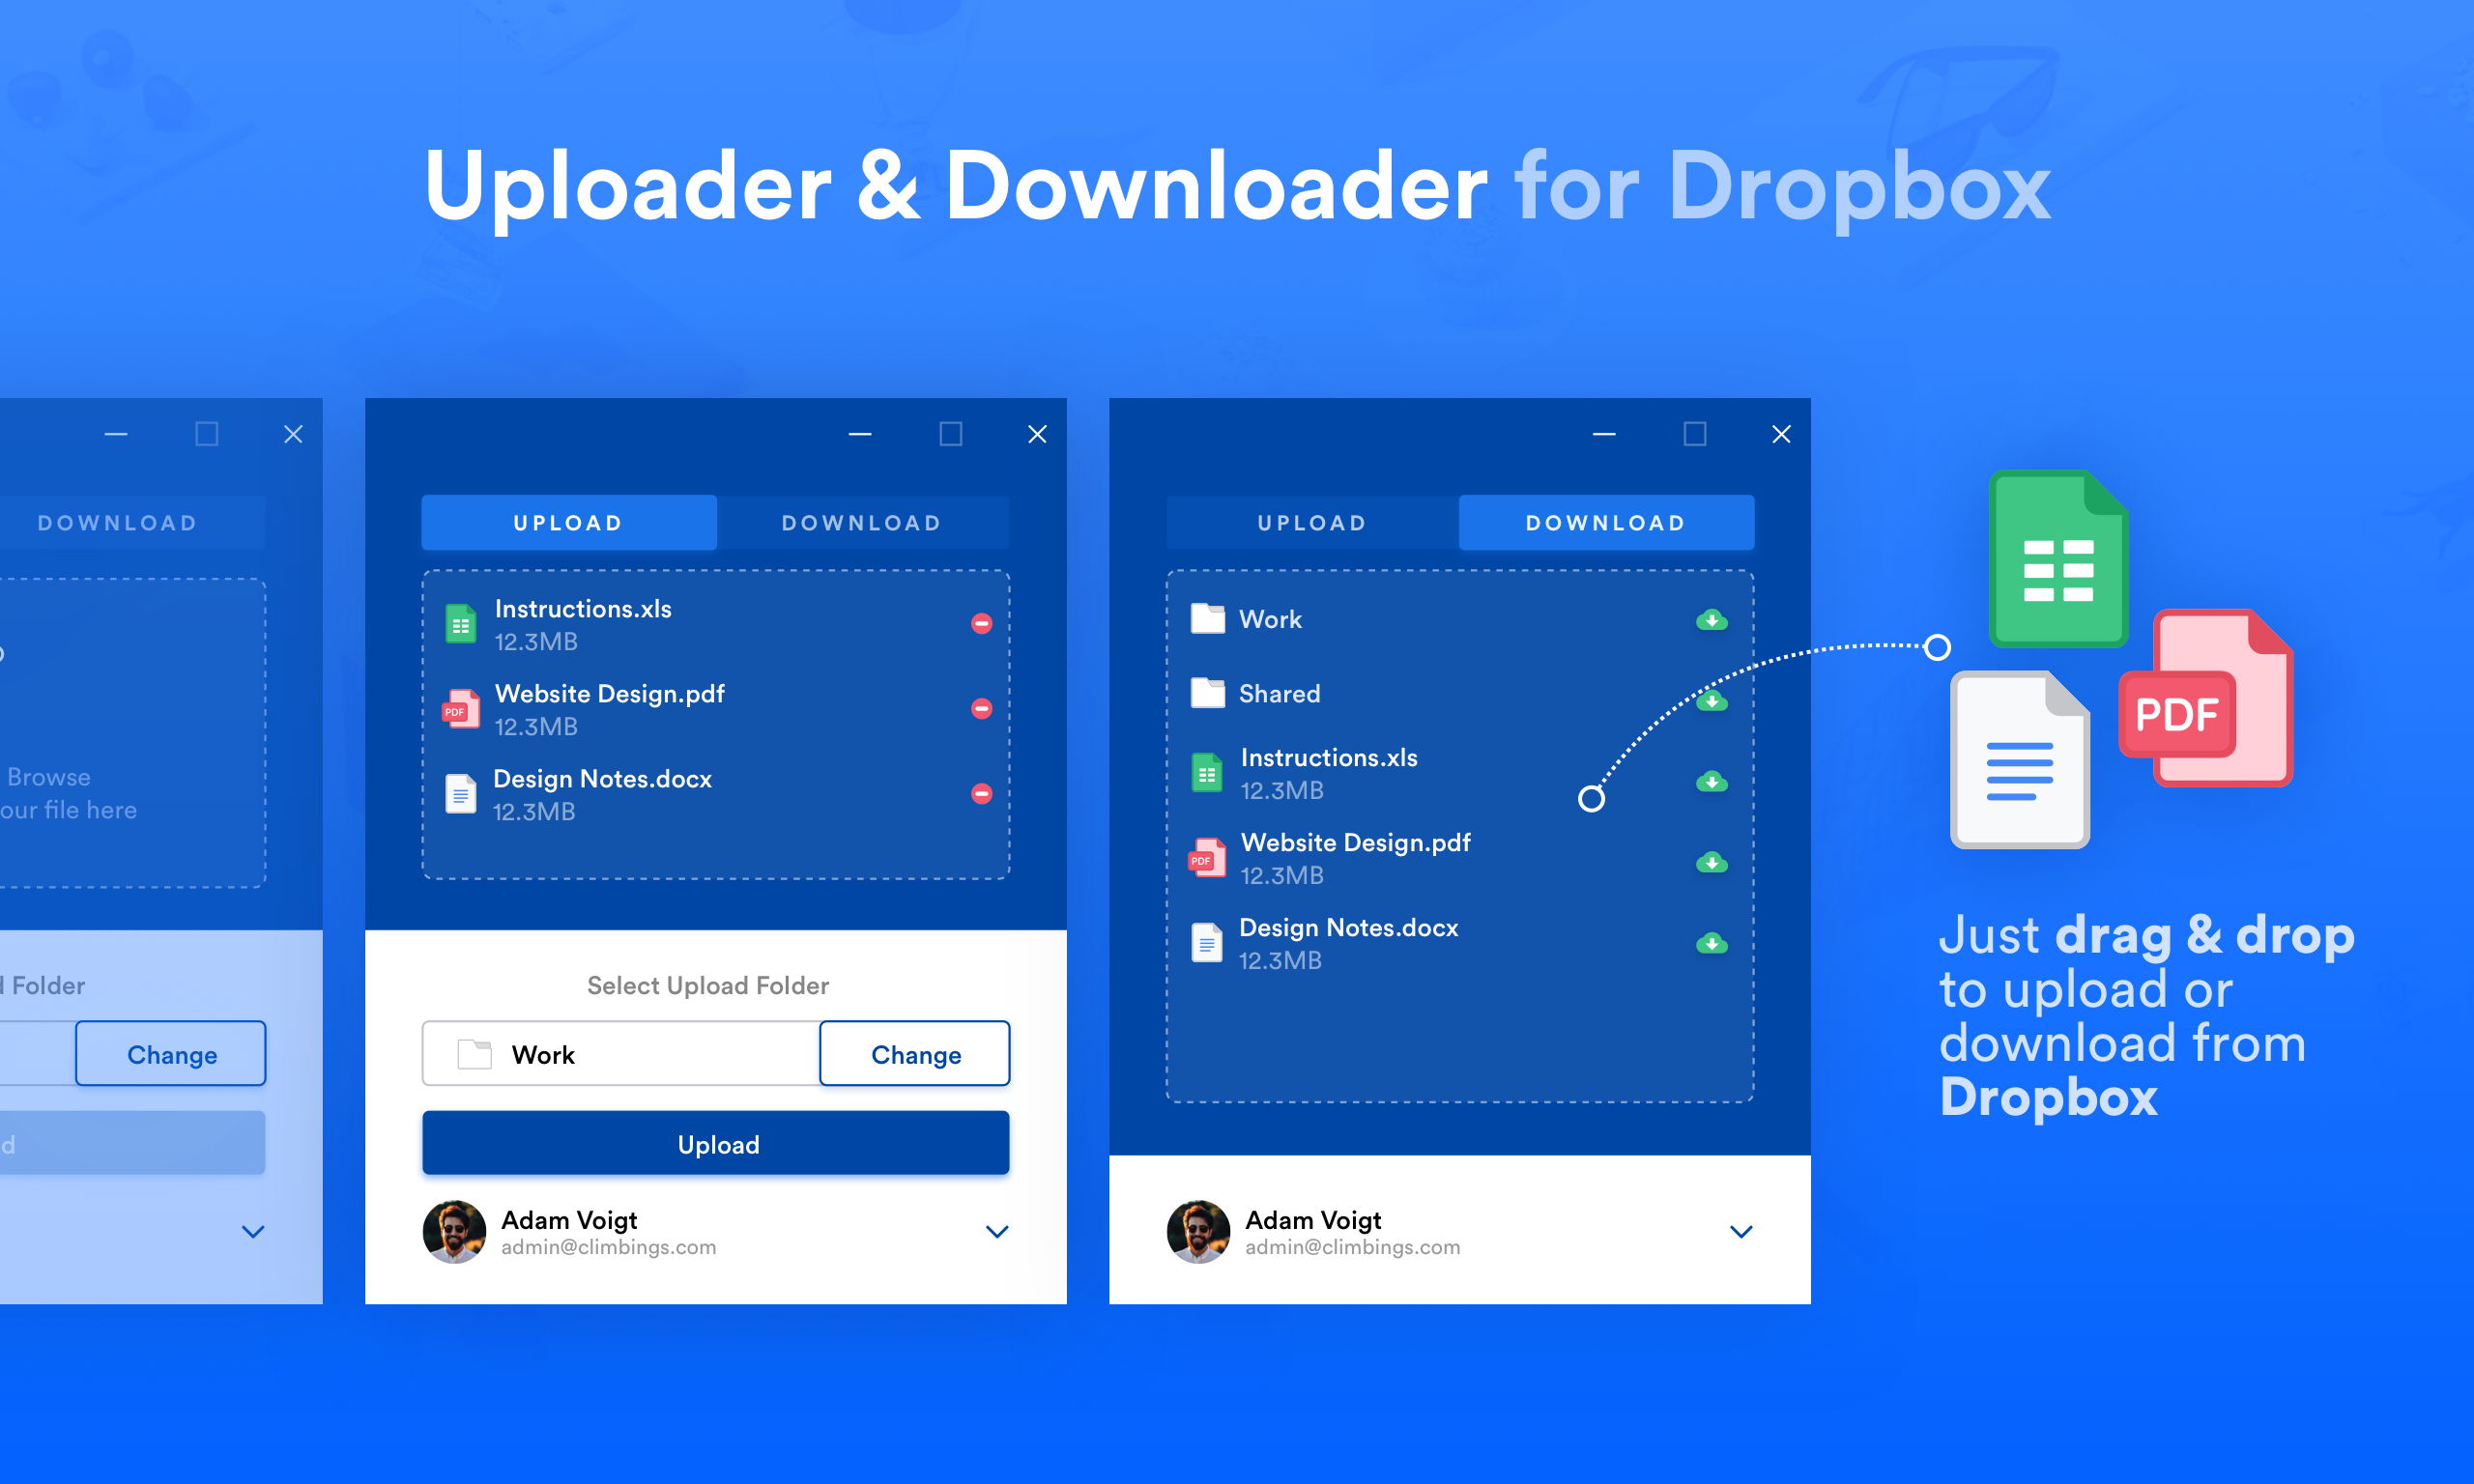 can i download from dropbox without an account